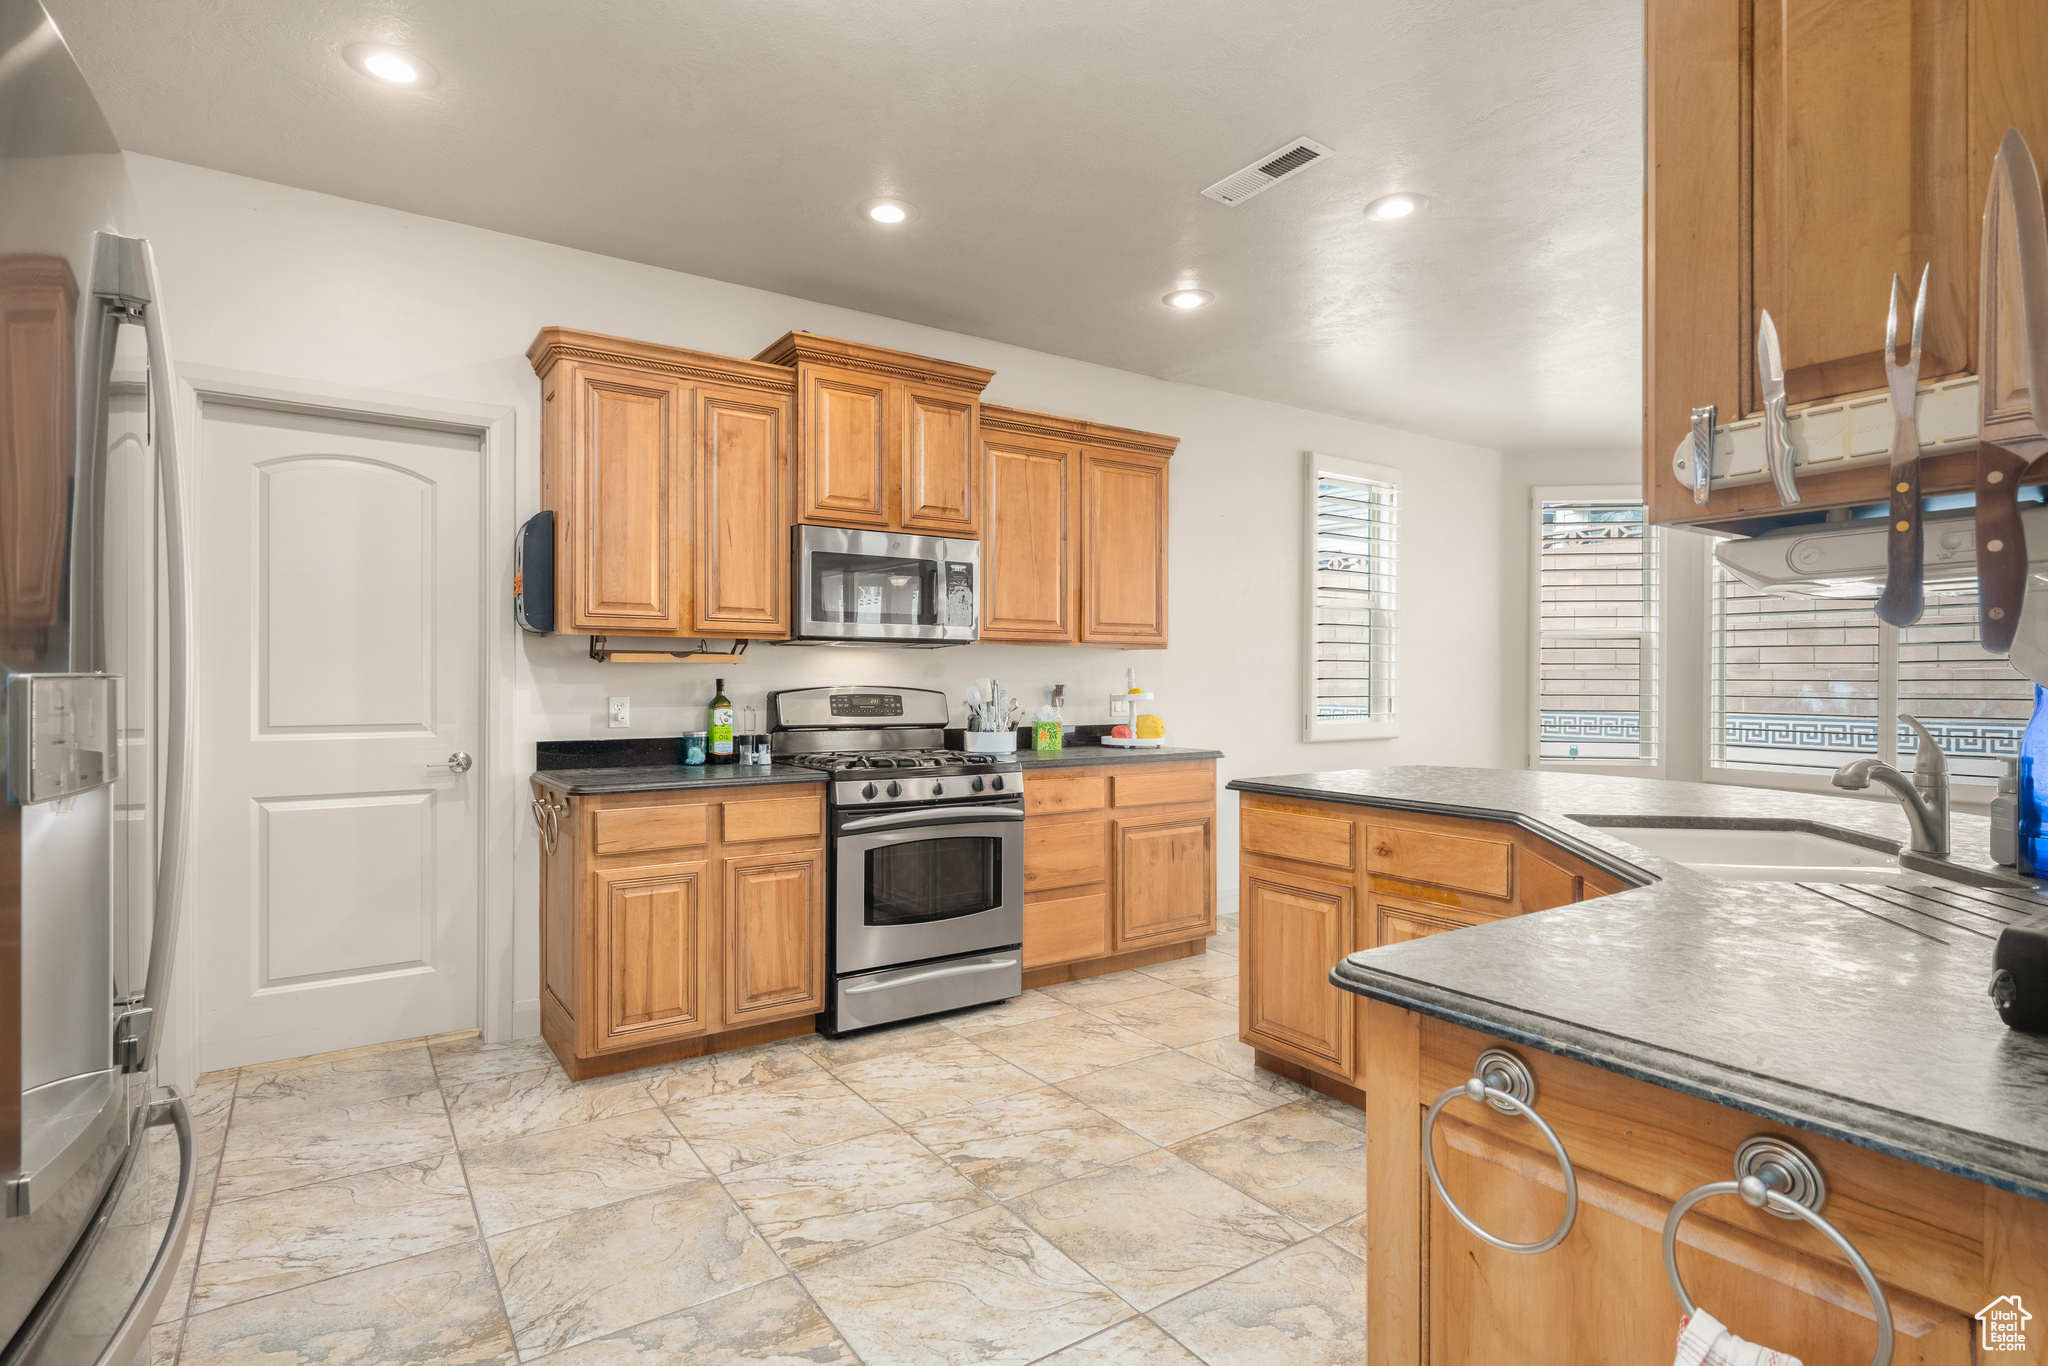 Kitchen featuring sink, light tile flooring, and appliances with stainless steel finishes